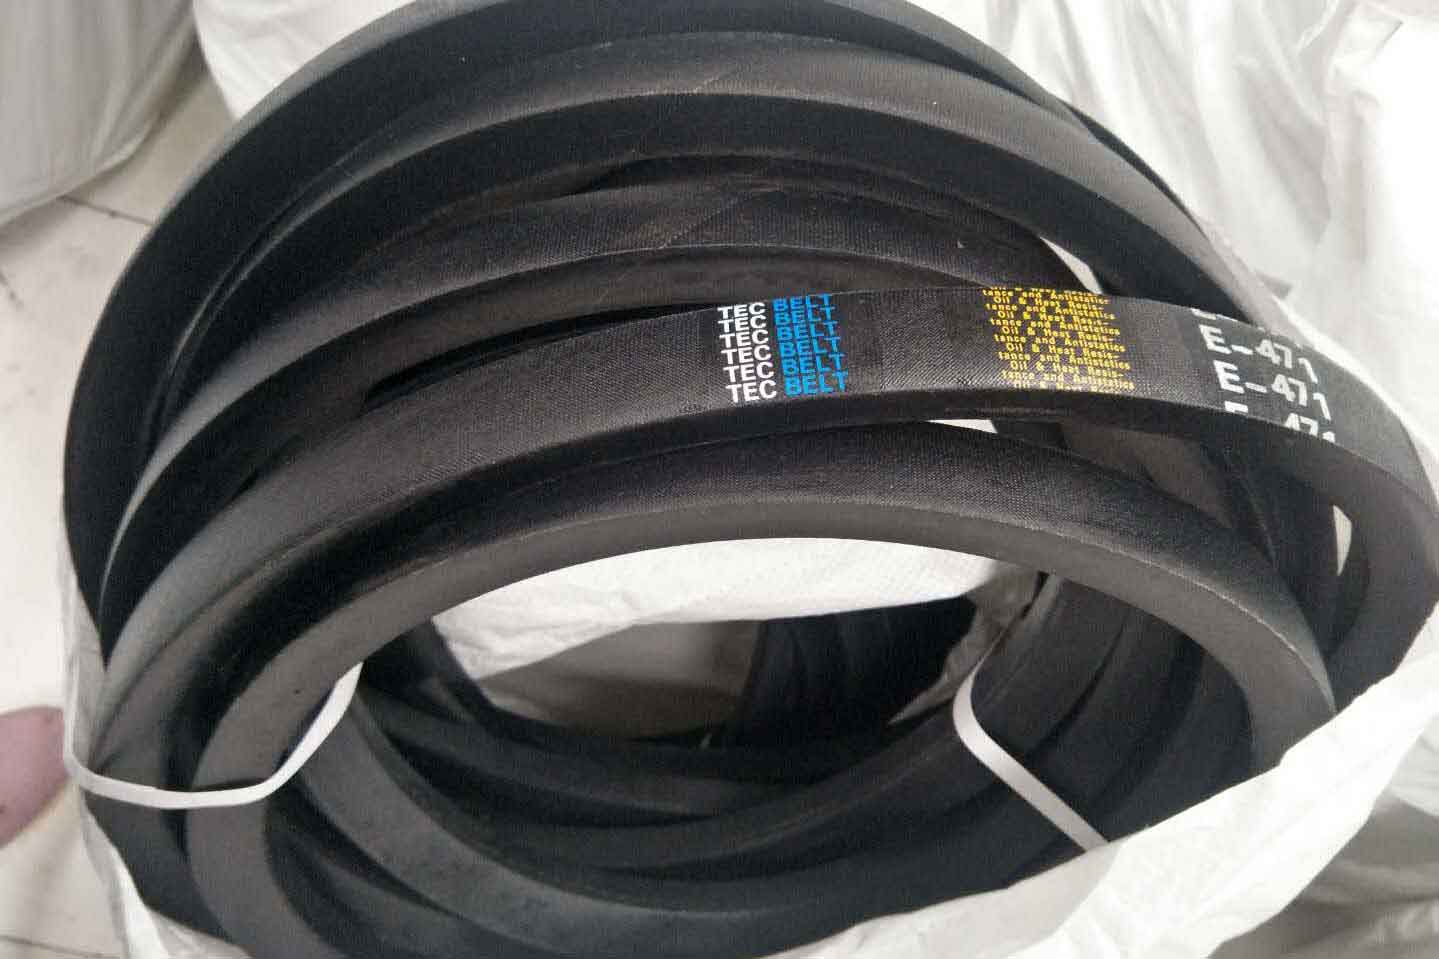 How to check the quality of V belts? Which aspects need to be checked?